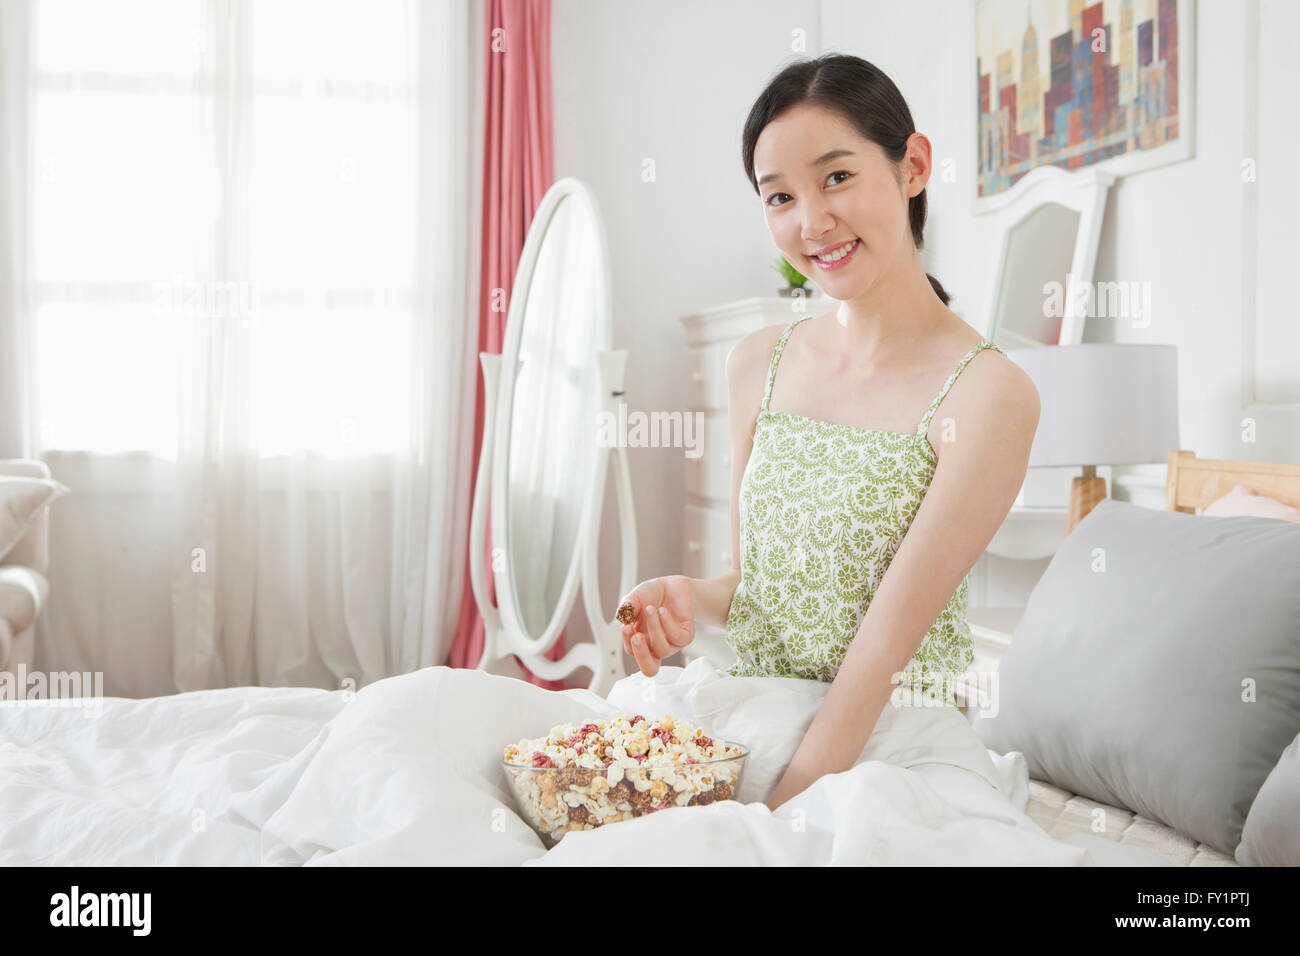 Portrait of young smiling woman sitting on bed eating popcorn fixant à l'avant Banque D'Images